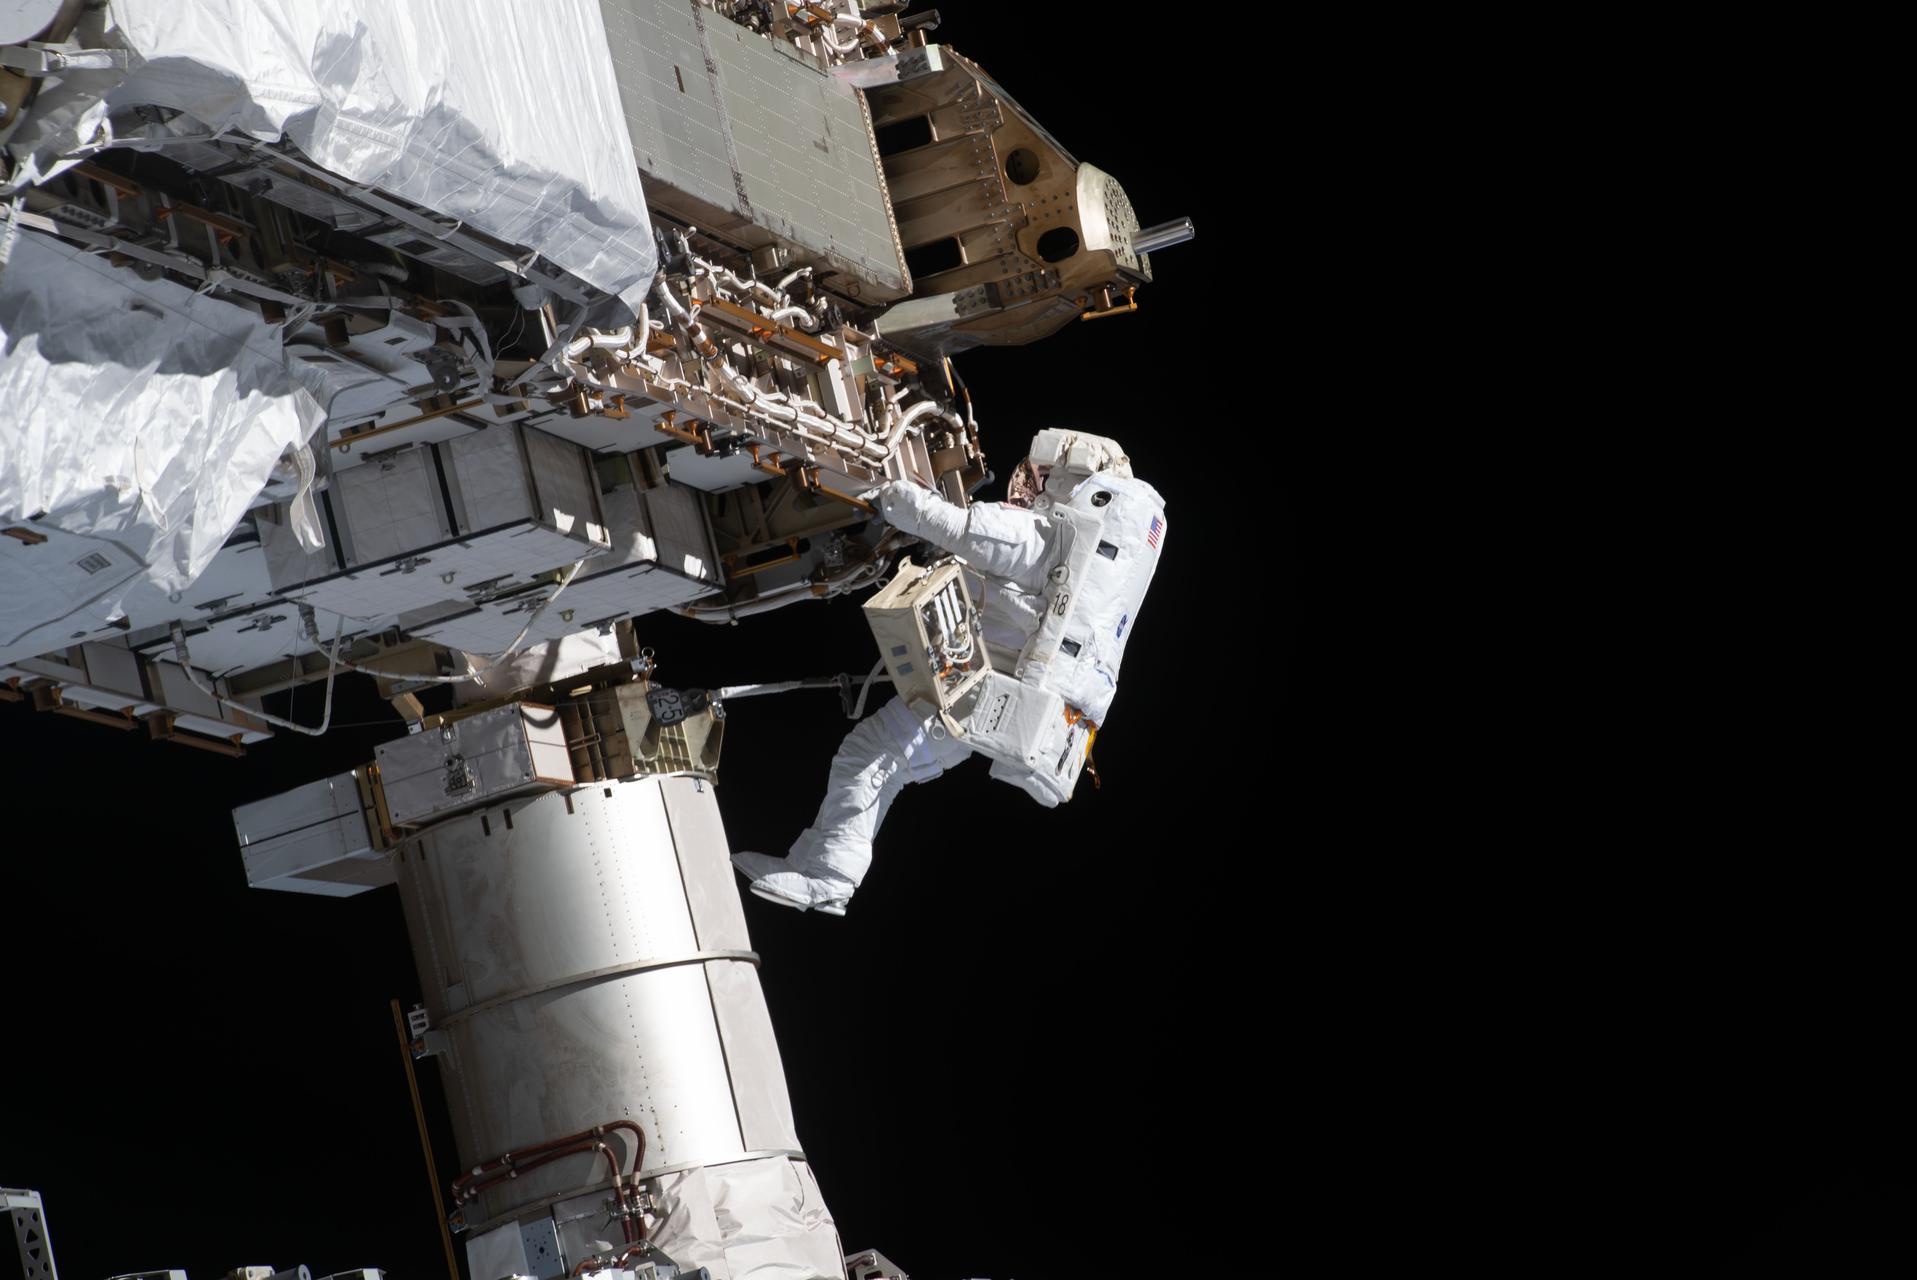 Three crew members from Expedition 64 will conduct two spacewalks working in pairs Sunday, Feb. 28, and Friday, March 5, to continue upgrades on the International Space Station.